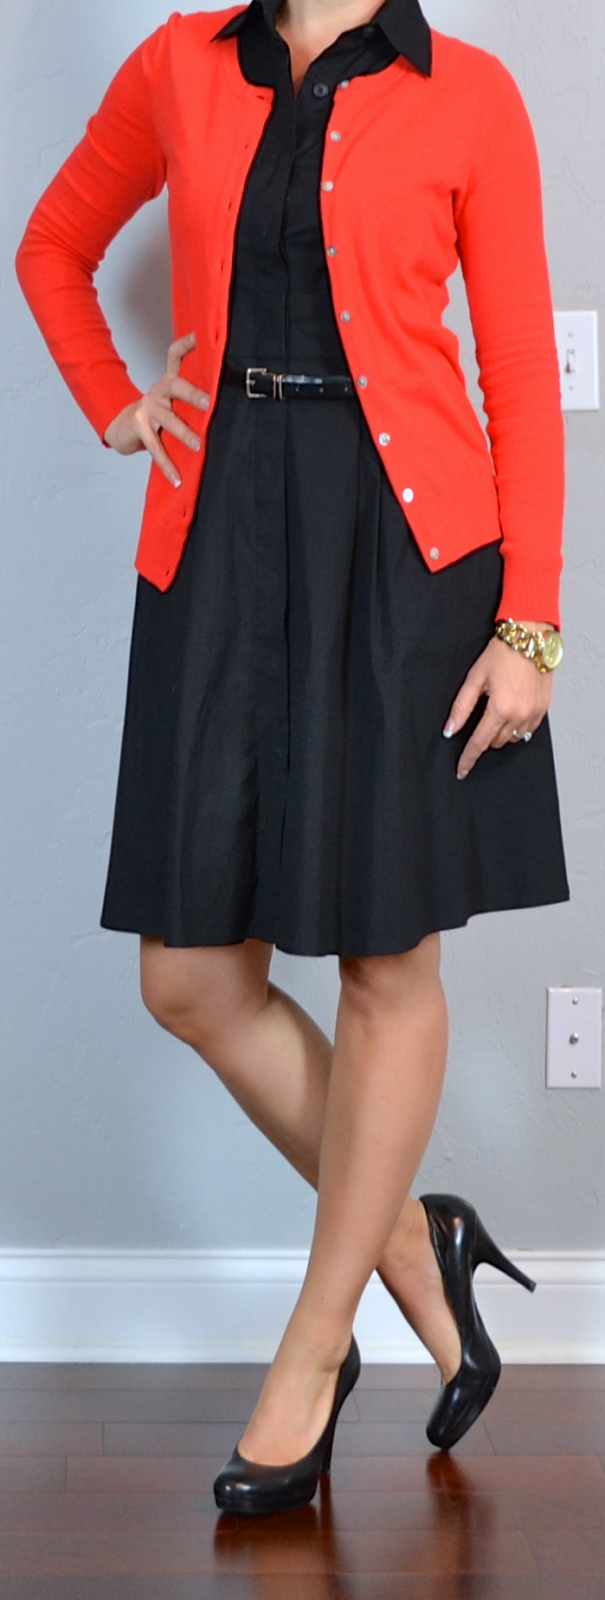 red and black shirt dress